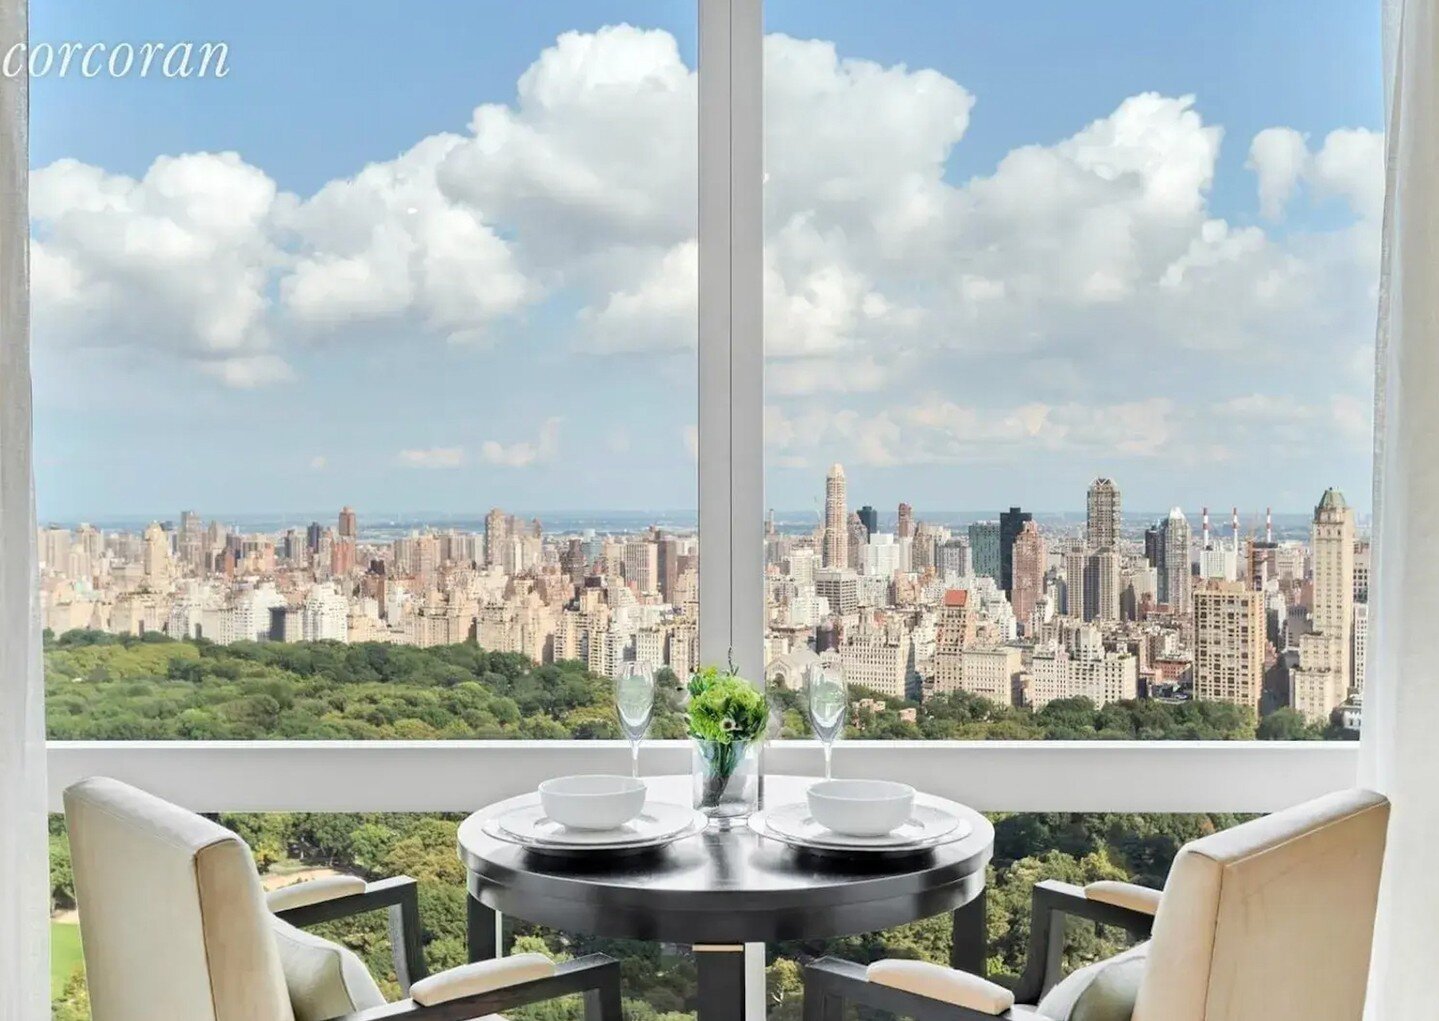 This is the best view to get some work done, huh?  25 Columbus Circle, 61B
Time Warner Center, Upper West Side, Manhattan, NY 10019 is an incredible listing that I'm honored to bring to market with @thecorcorangroup. ✨

Experience modern luxury from 